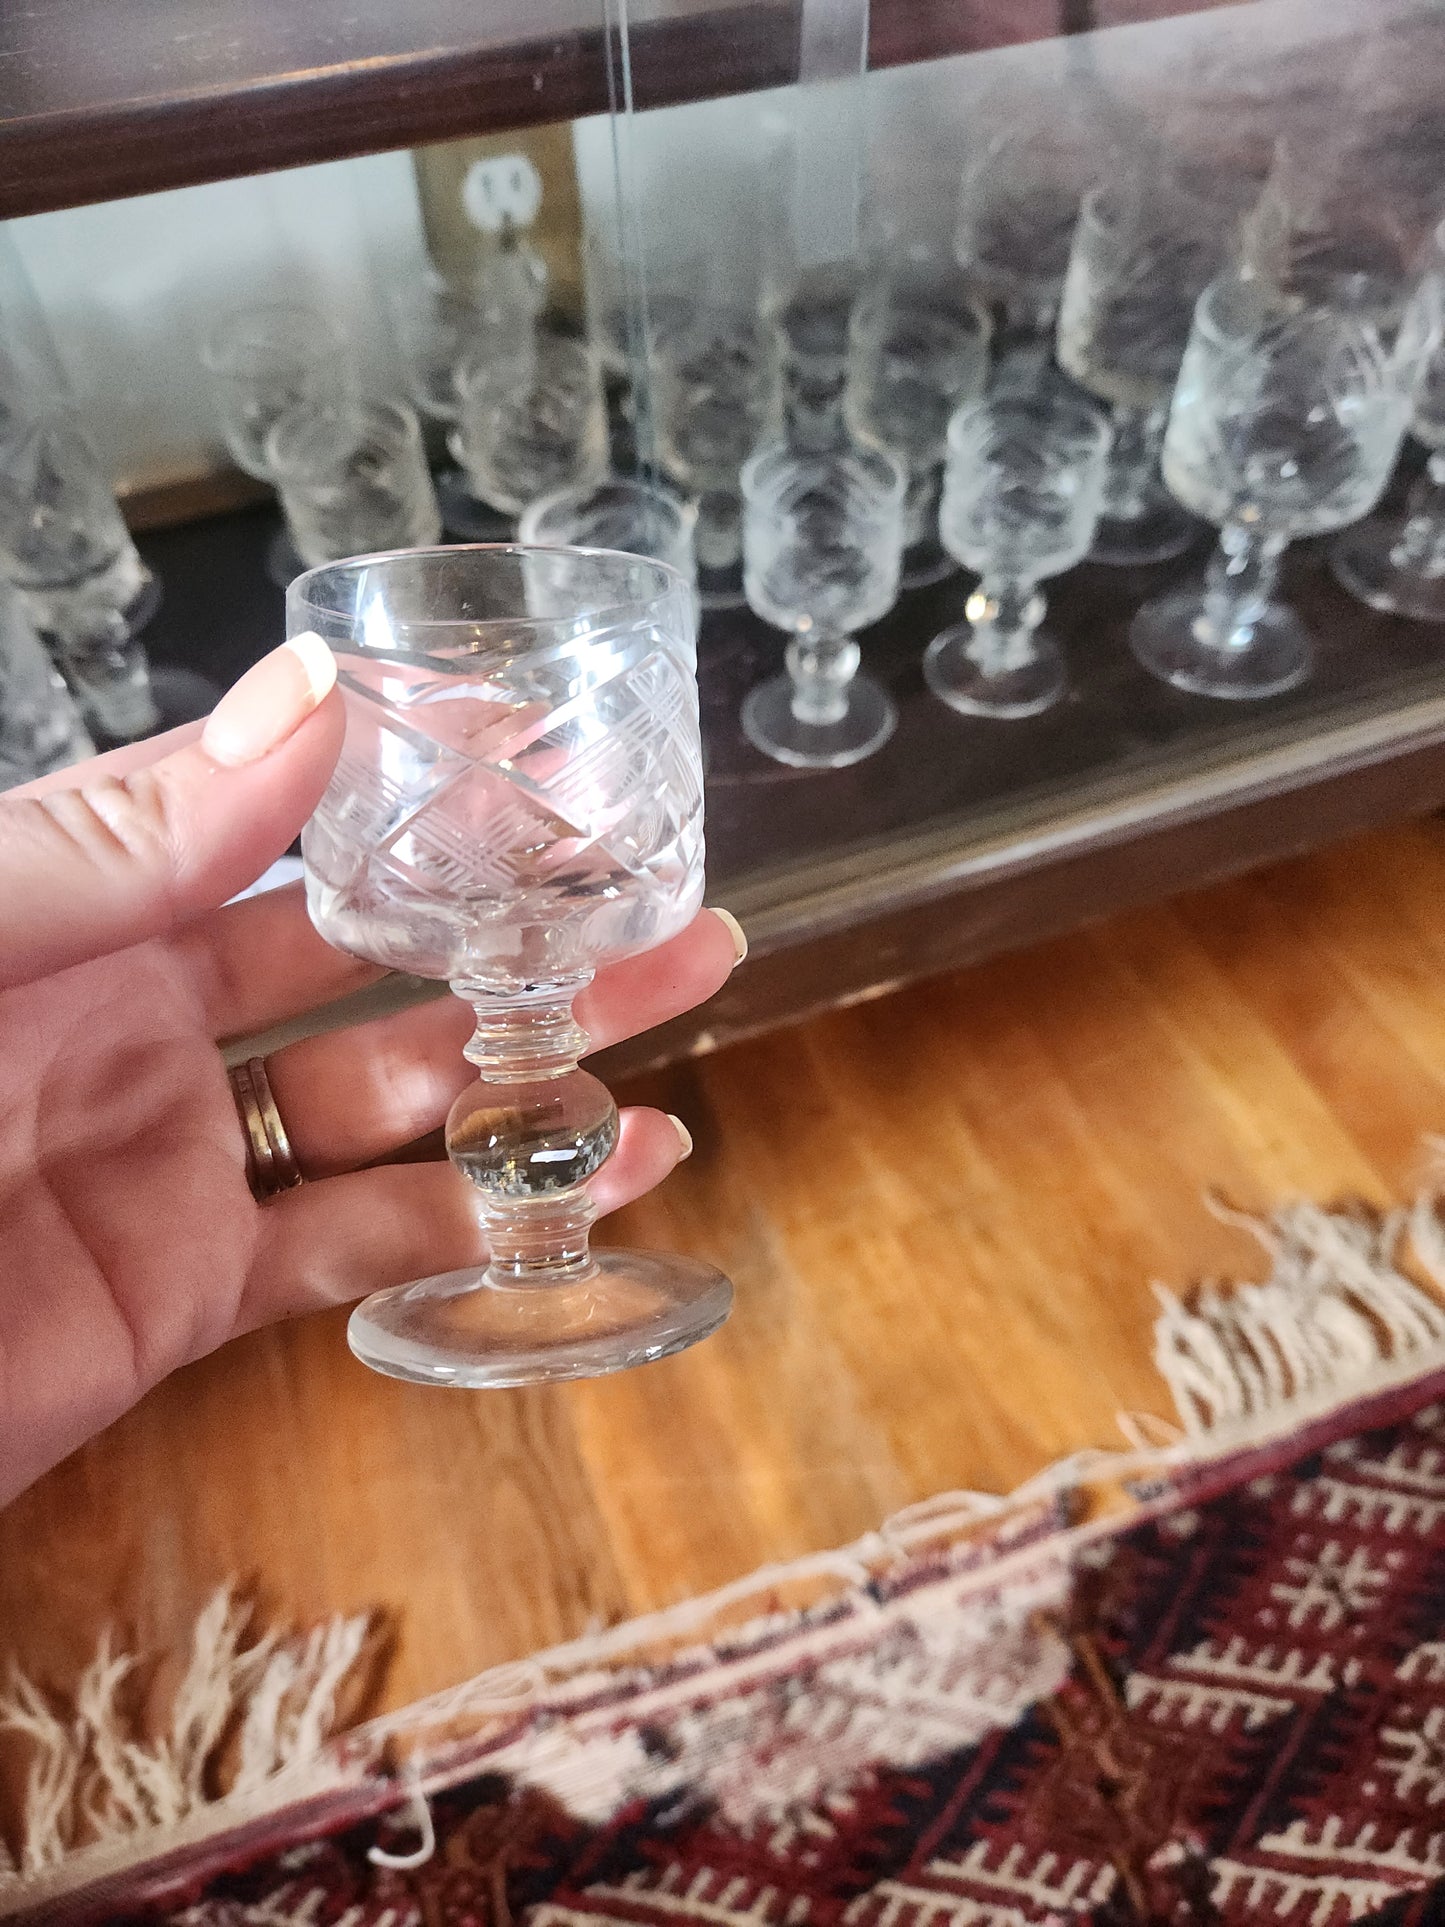 Large Collection of Vintage Glassware